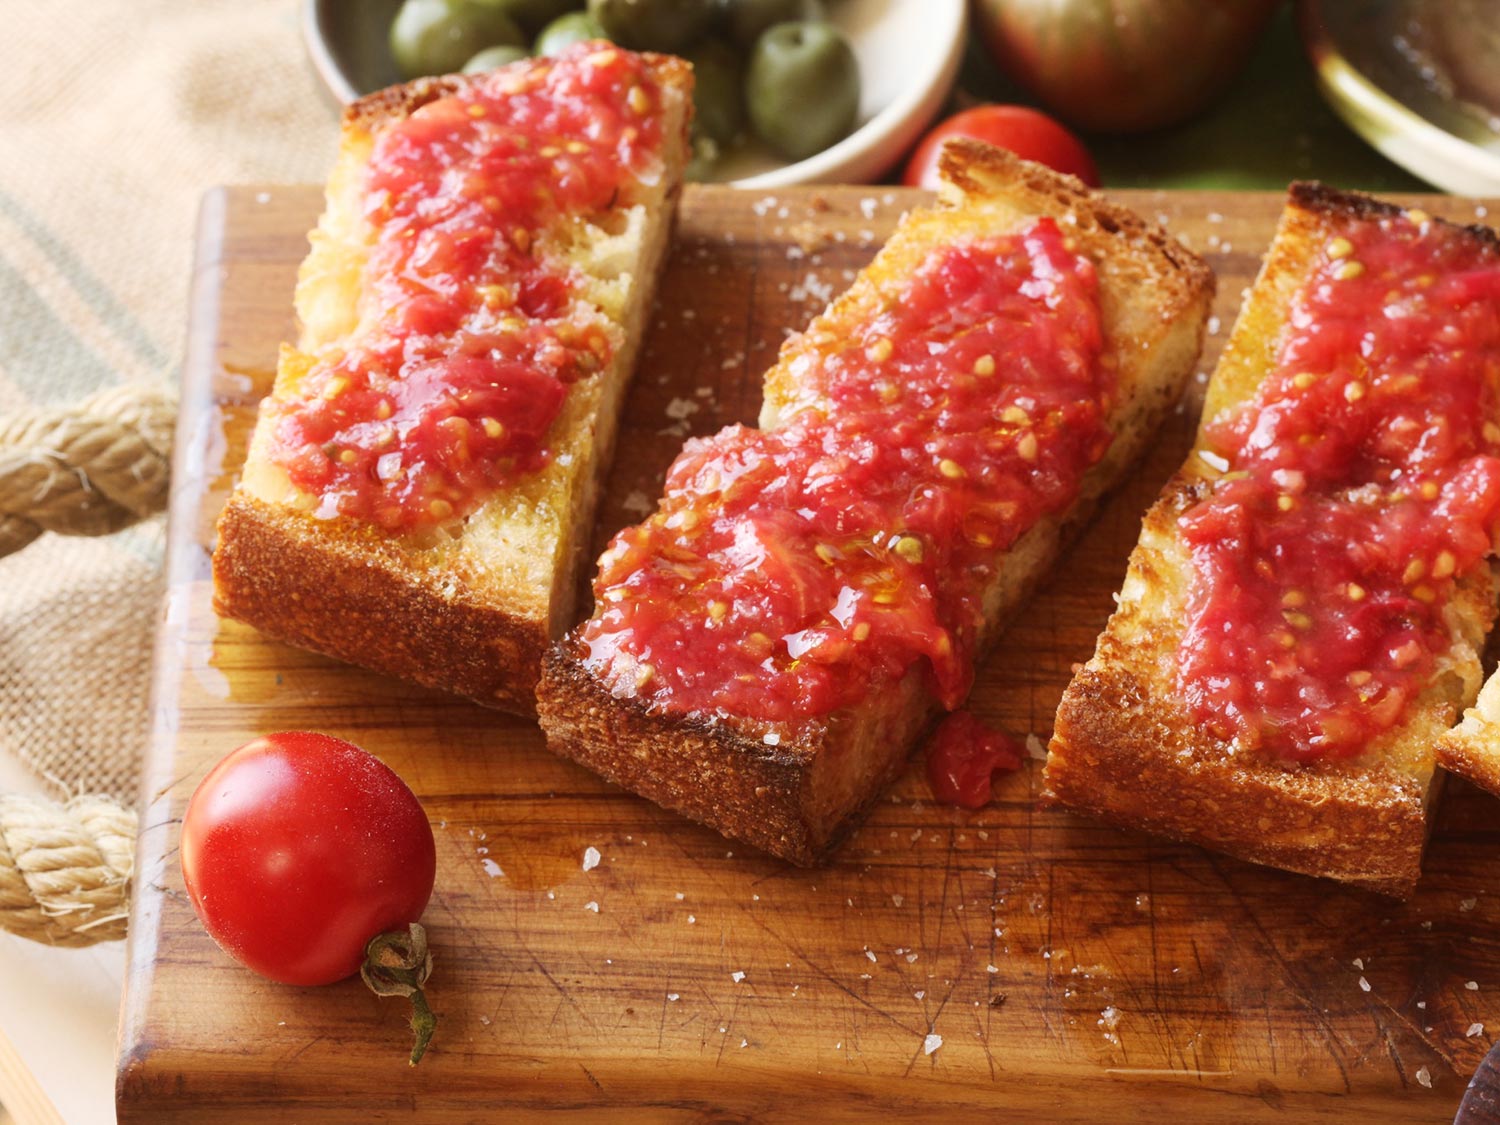 Pan con tomate, Pan con tomate, Spanish tomato on toast for breakfast.